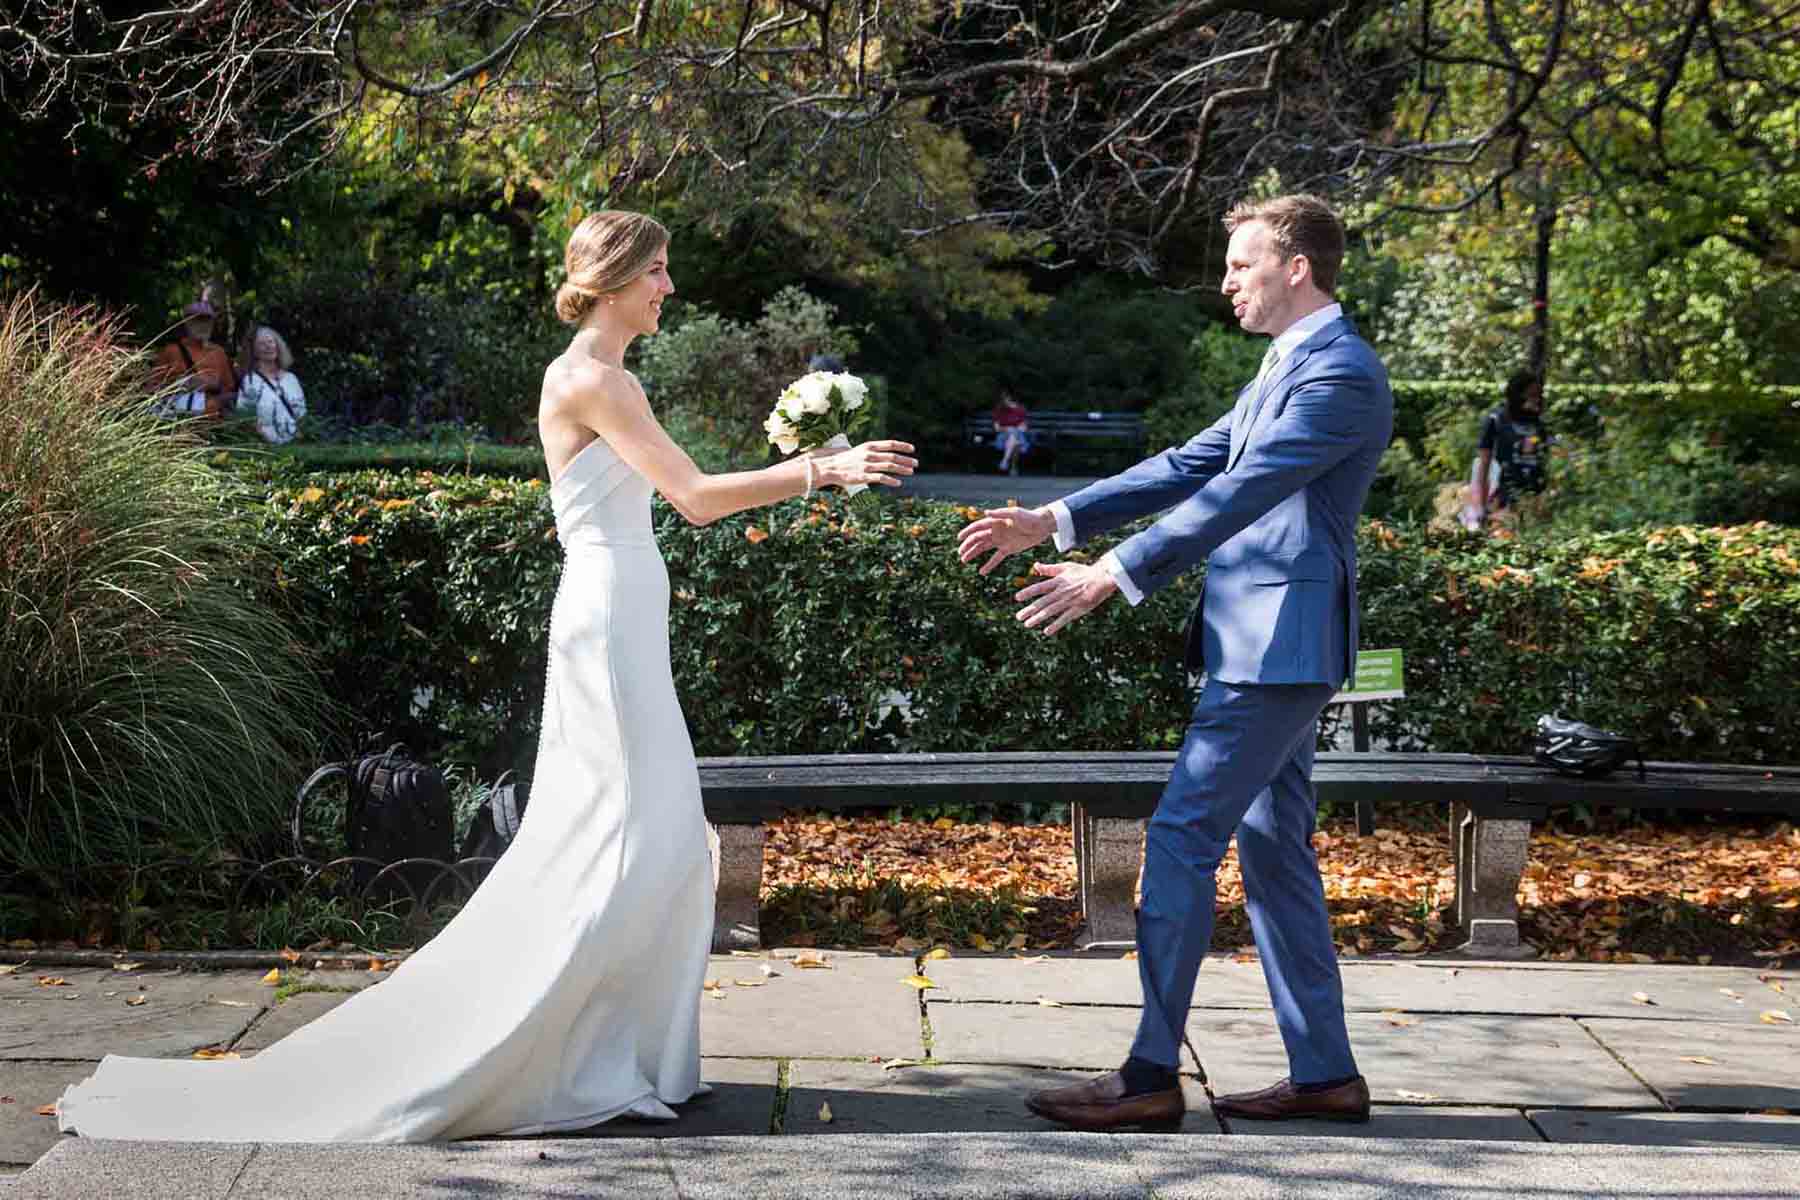 Conservatory Garden wedding photos of bride and groom reaching for each other during first look